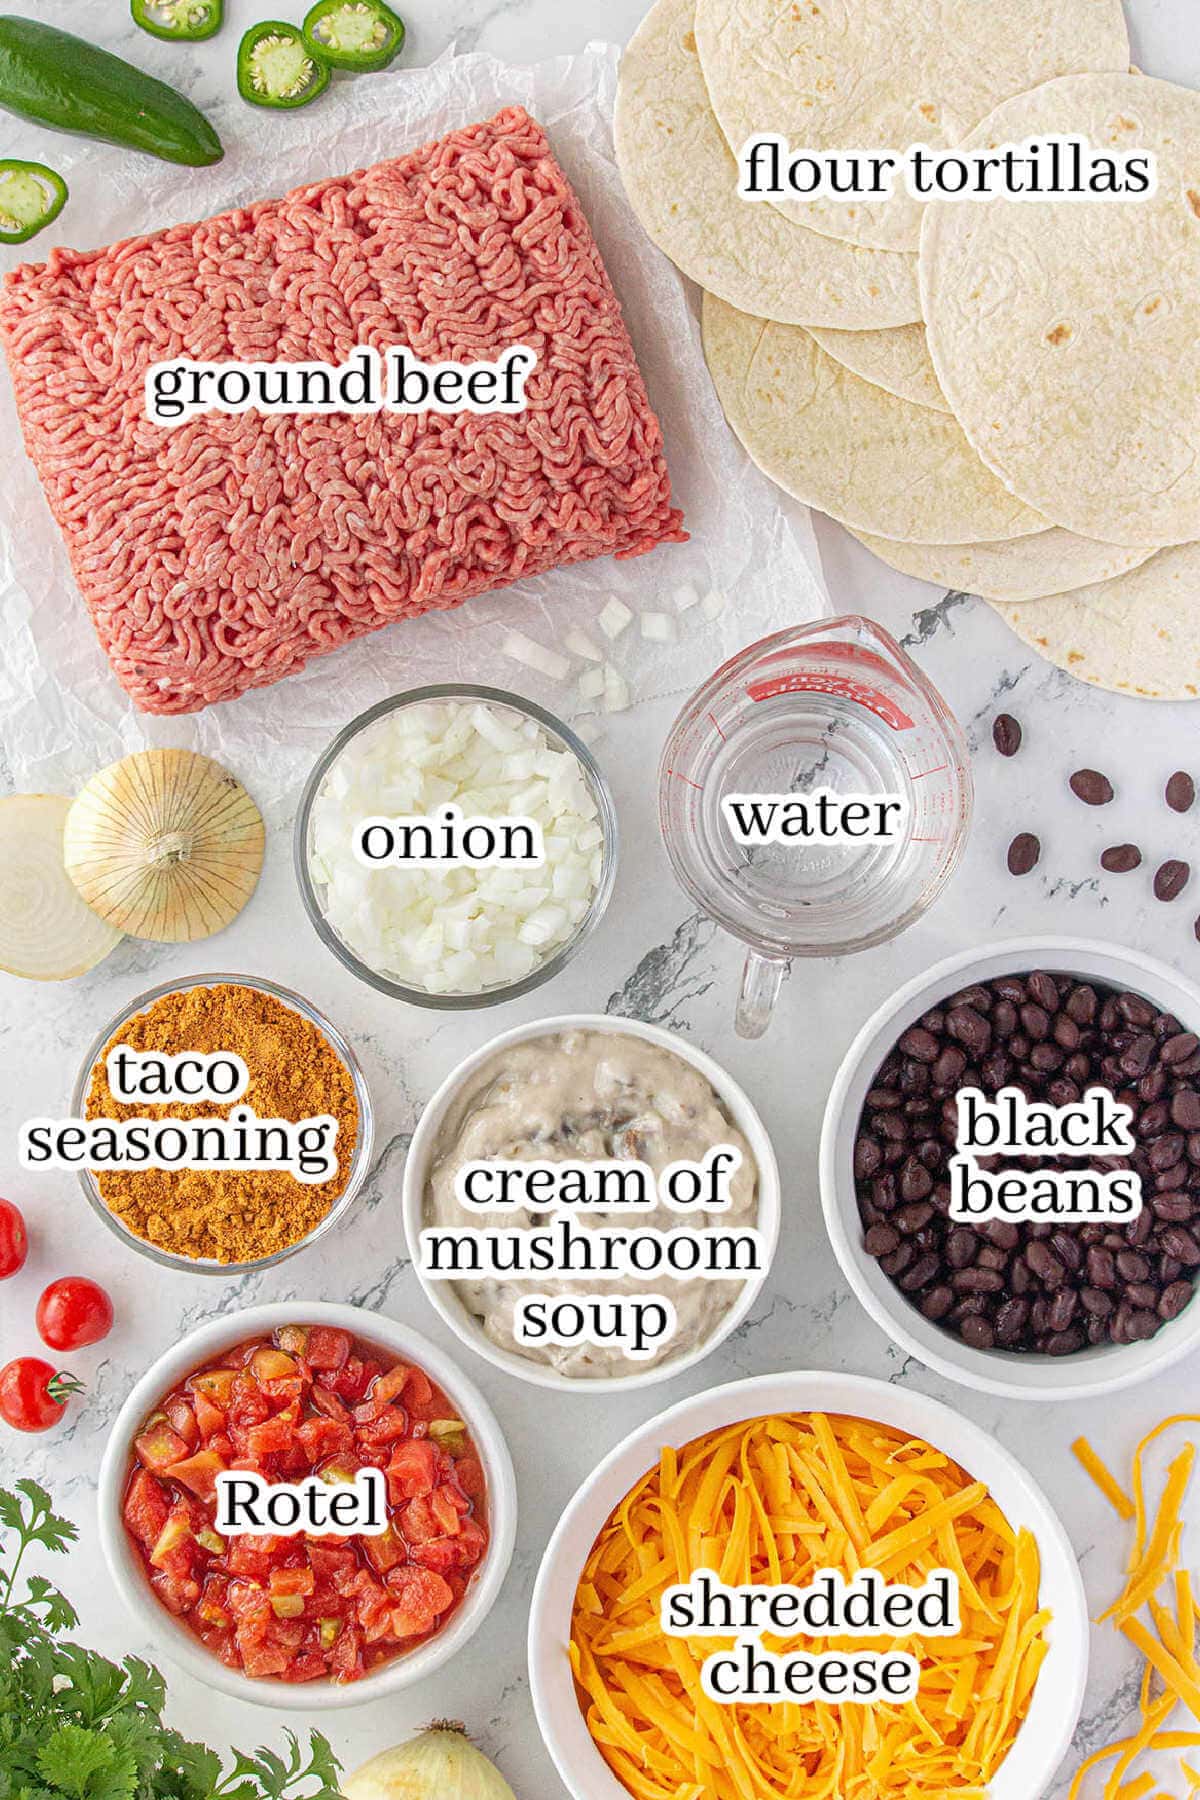 Ingredients to make the casserole dish, with print overlay.